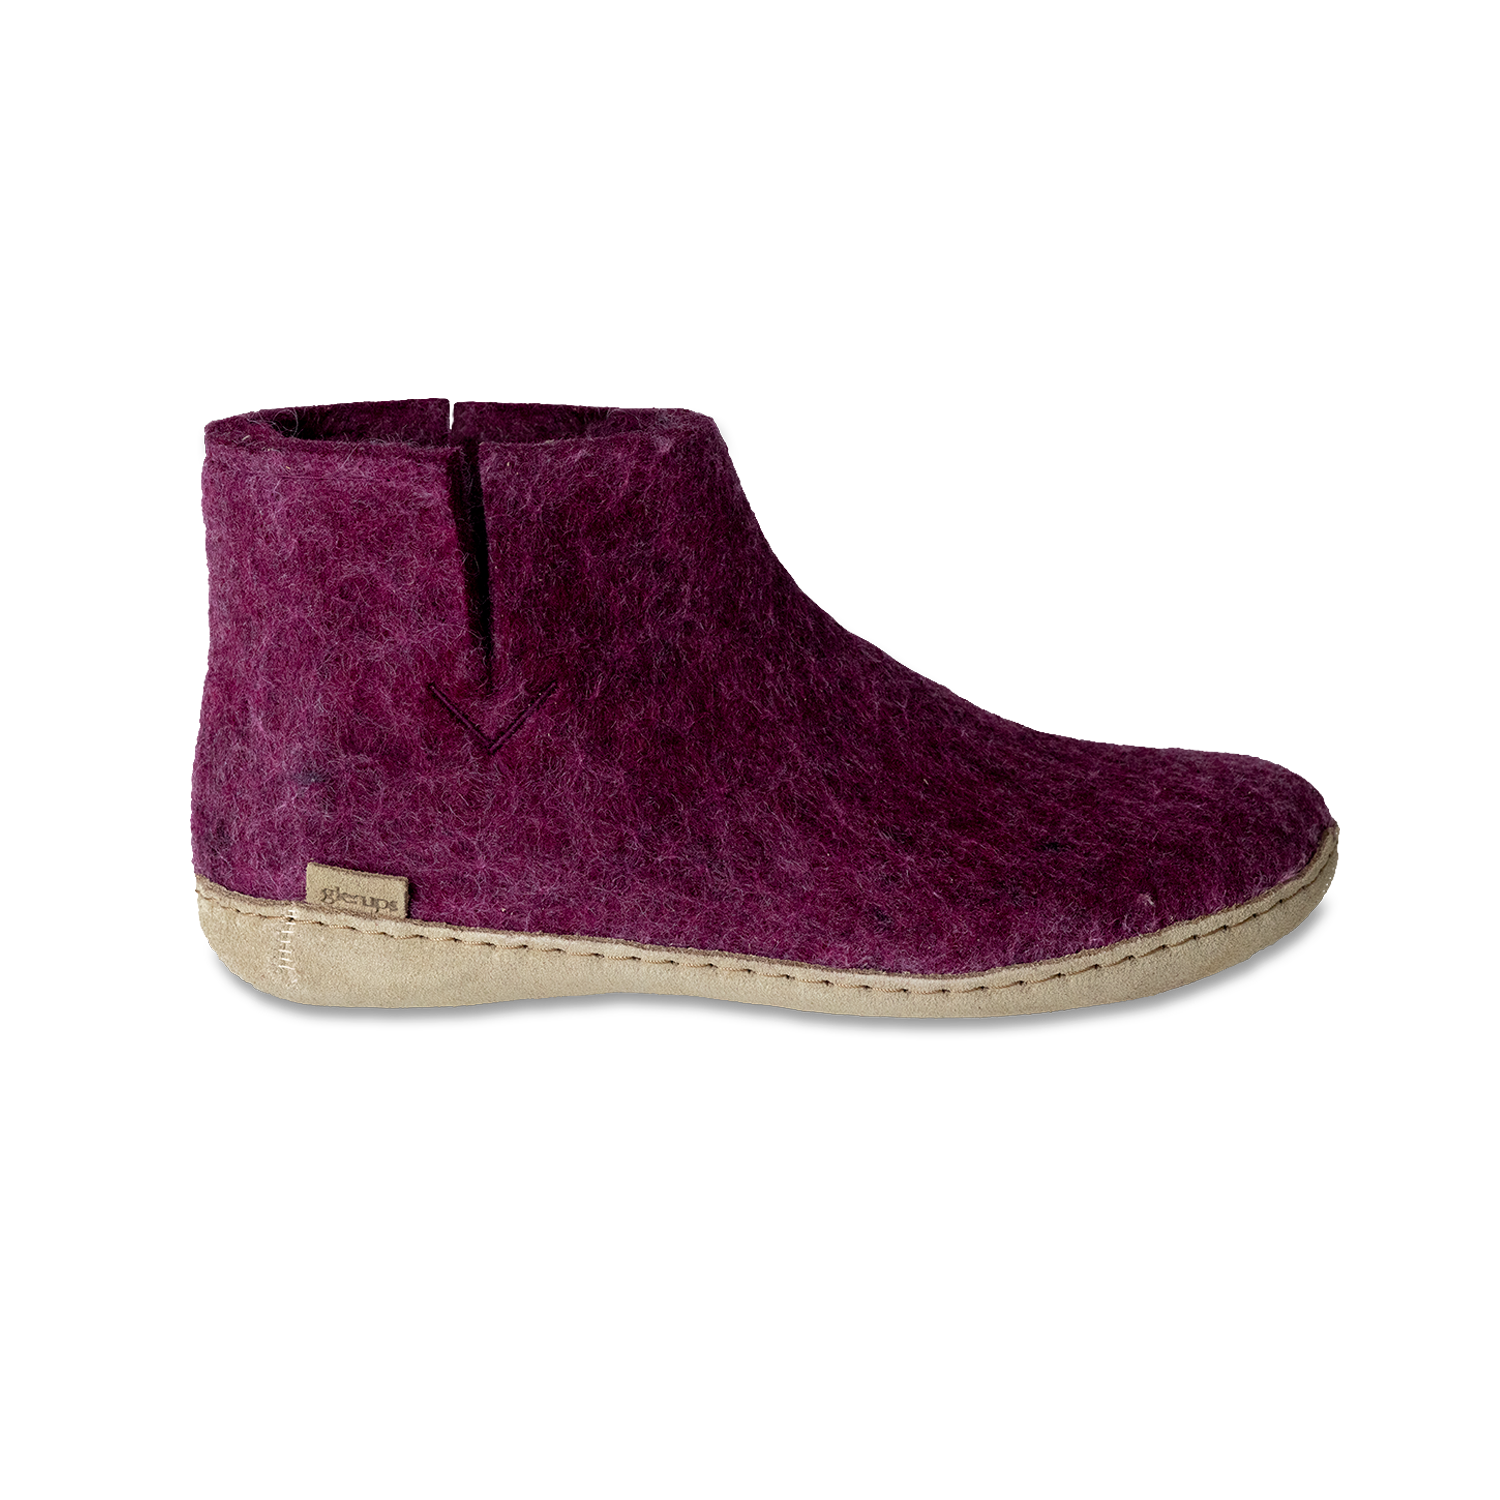 Glerups Boot Cranberry - Leather Sole